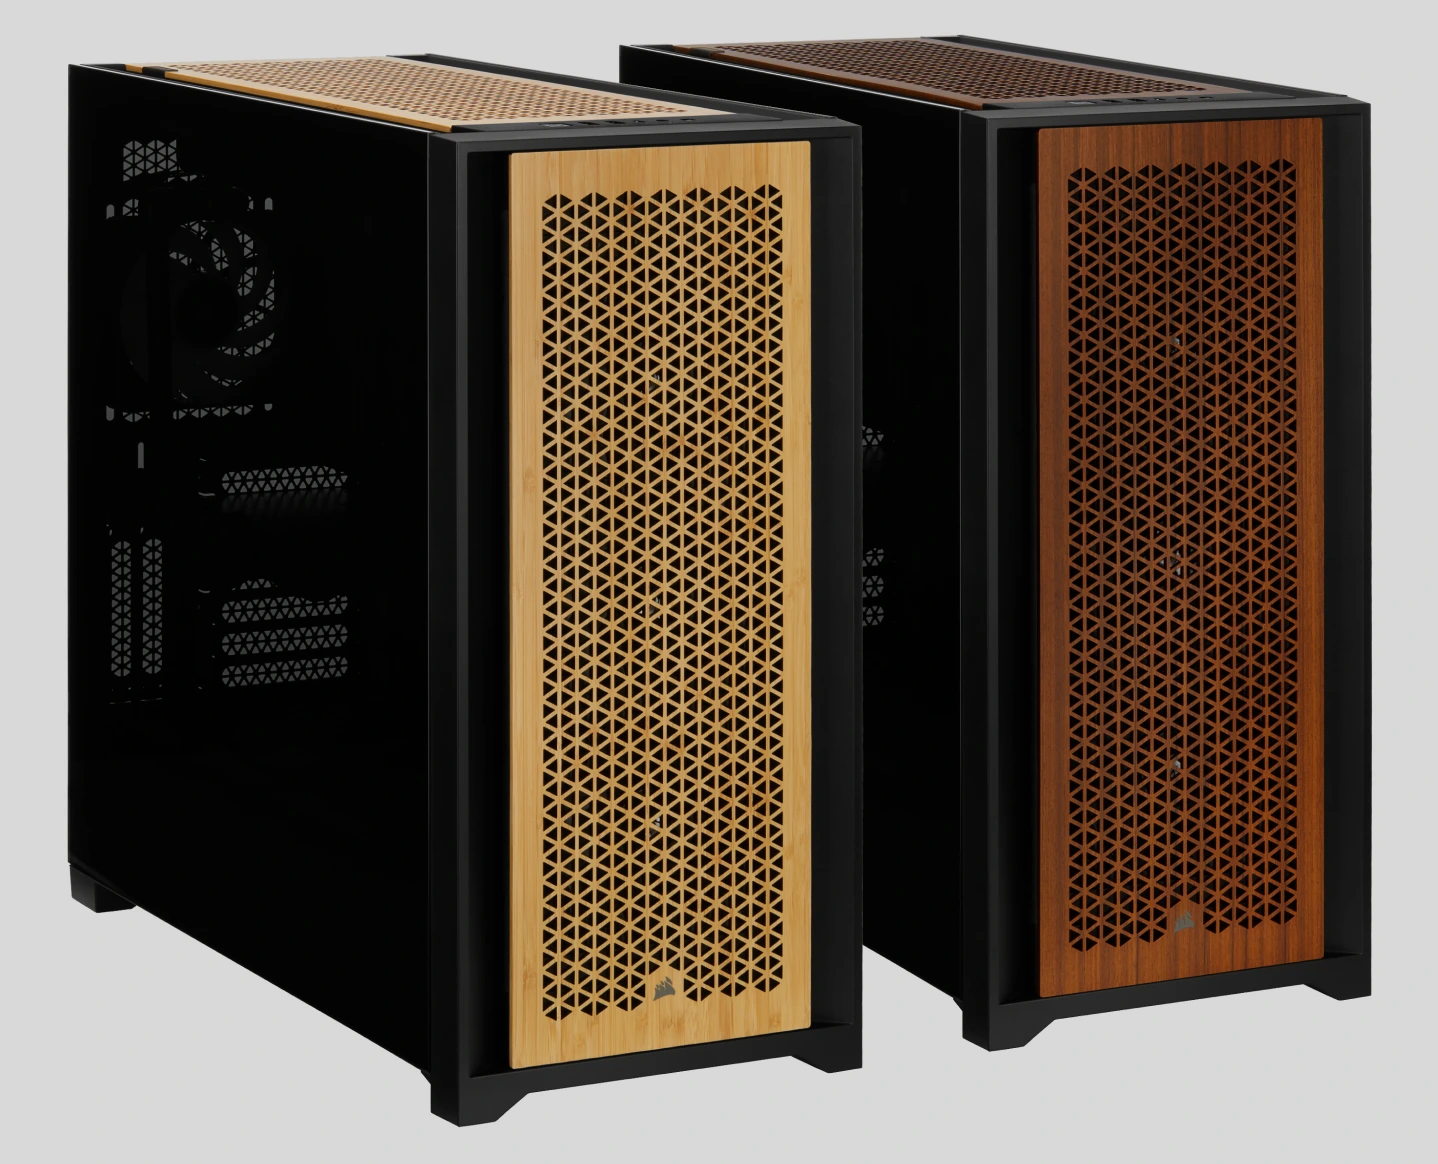 A 4000D Series case equipped with wooden front panel.